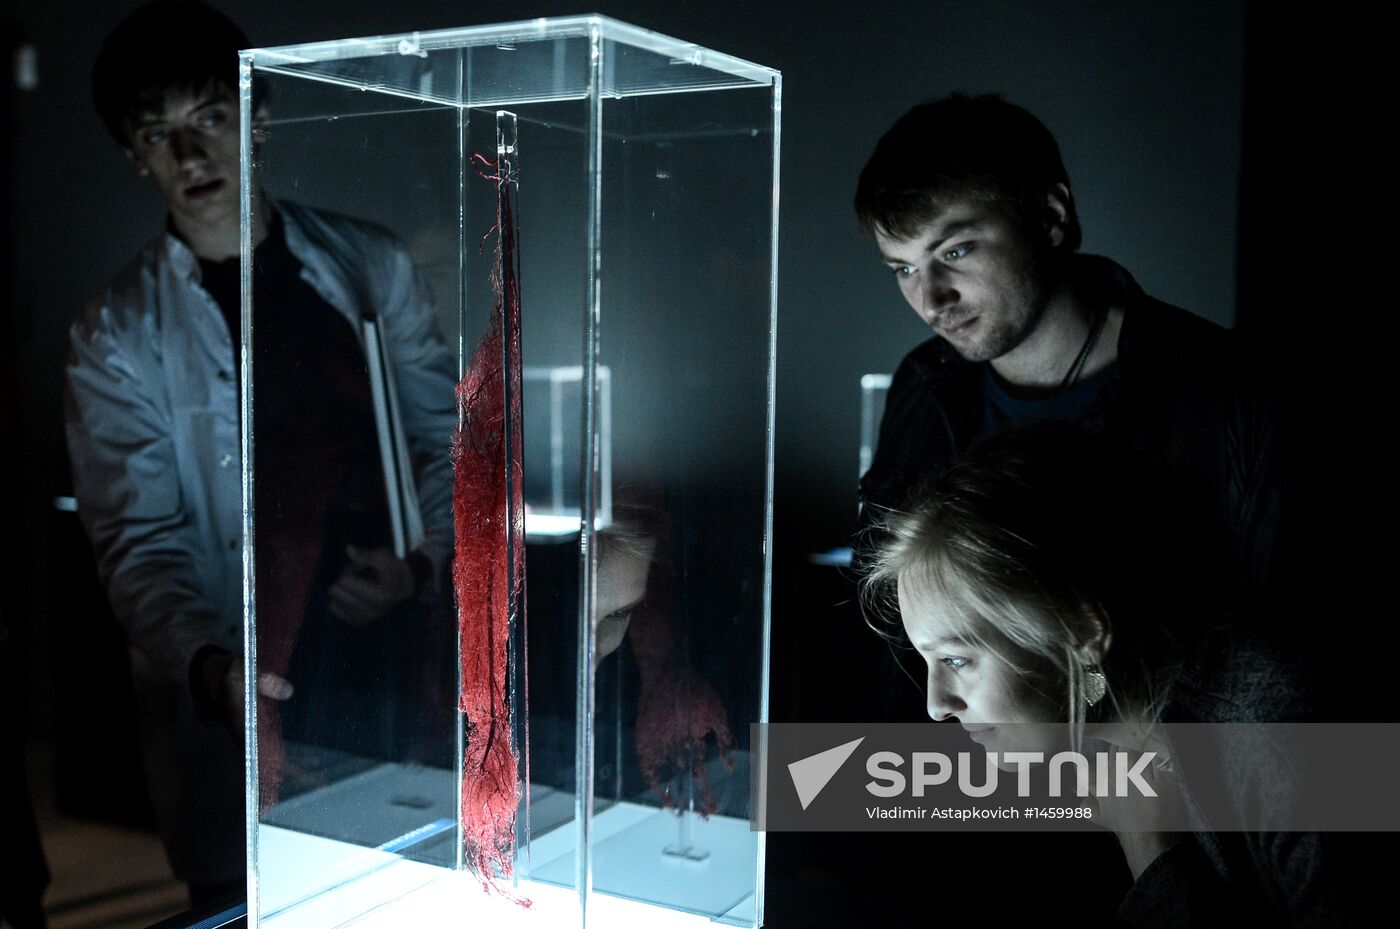 Exhibition "Secrets of the Body. The Universe Inside" in Moscow